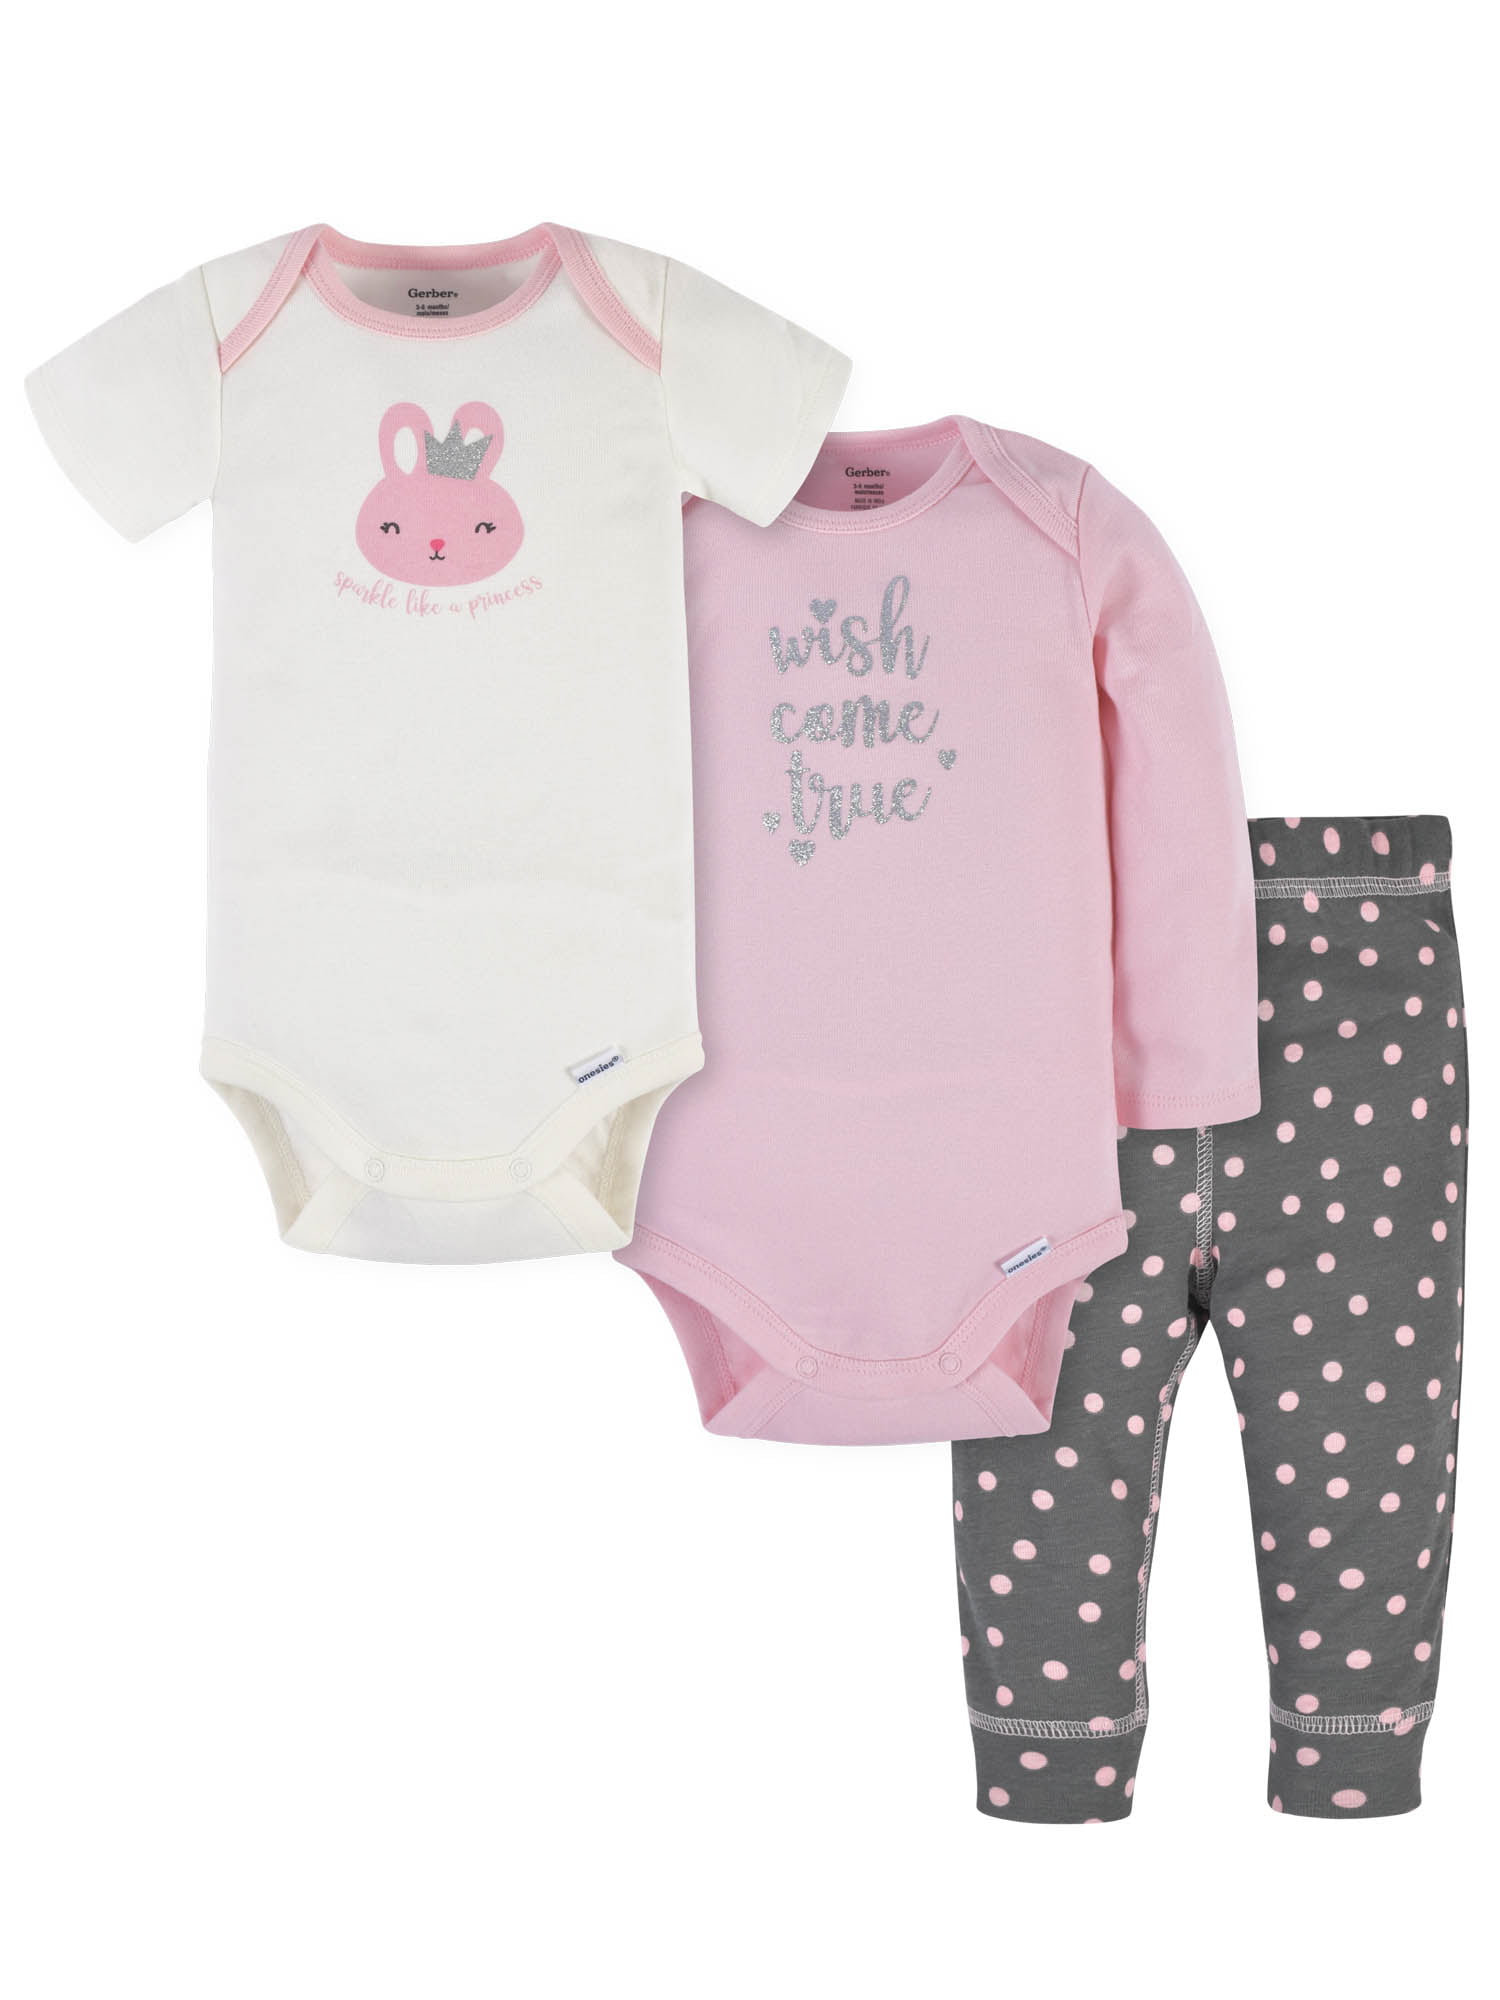 9 Months, Sparkle/Kitty Carter's Baby Girl's 3-Piece Bodysuits and Pants Sets 